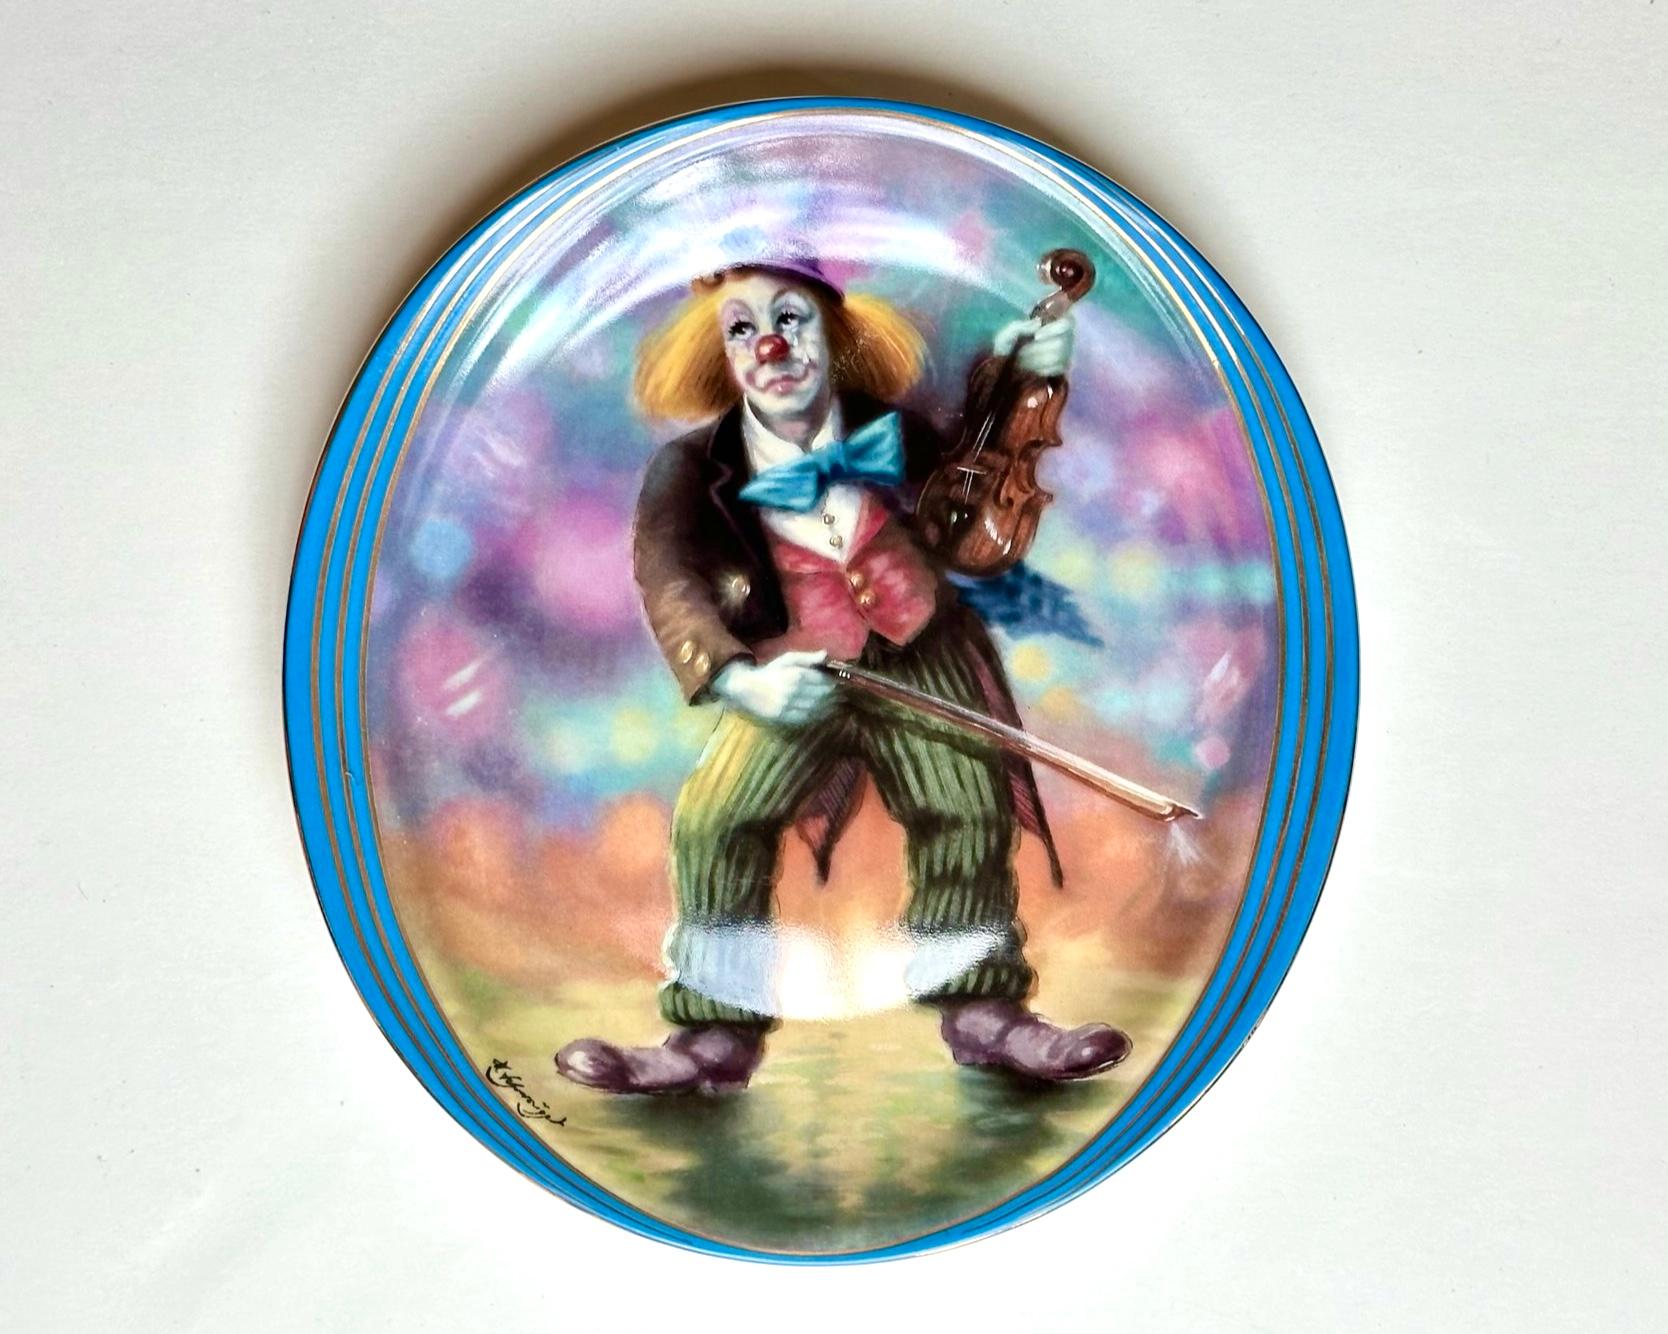 Beautiful decorative set of 4 plates “Impressions of a Clown” designed by renowned German artist Harald Schwaiger for Annaburg.

Germany. 1994.

Collectible porcelain plates from the end of the 20th century.

Oval shape. Textured edge.

Each